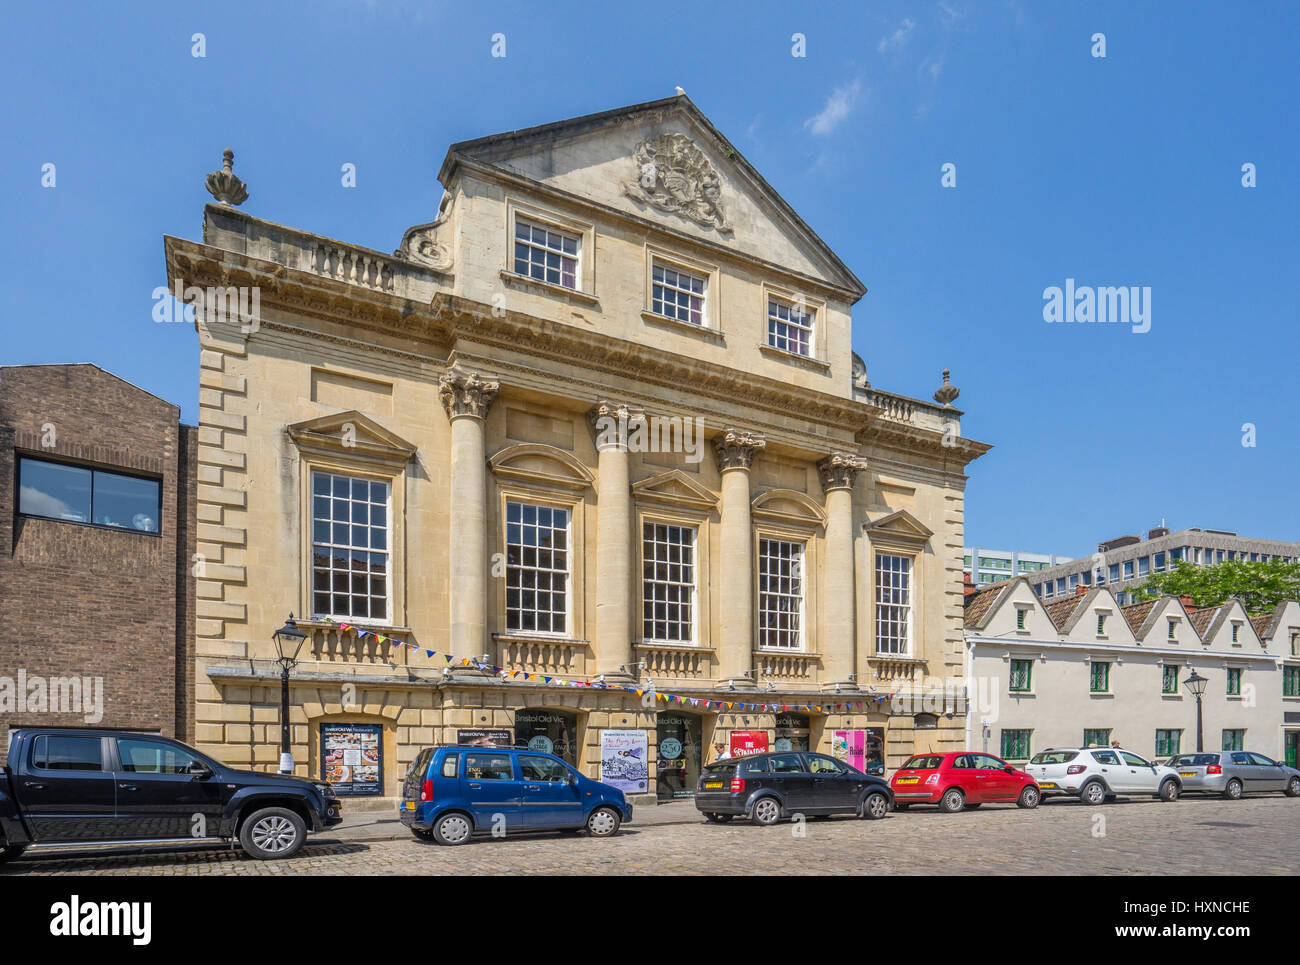 United Kingdom, South West England, Bristol, The Cooper's Hall in 17th century King Street in the historic centre of Bristol Stock Photo